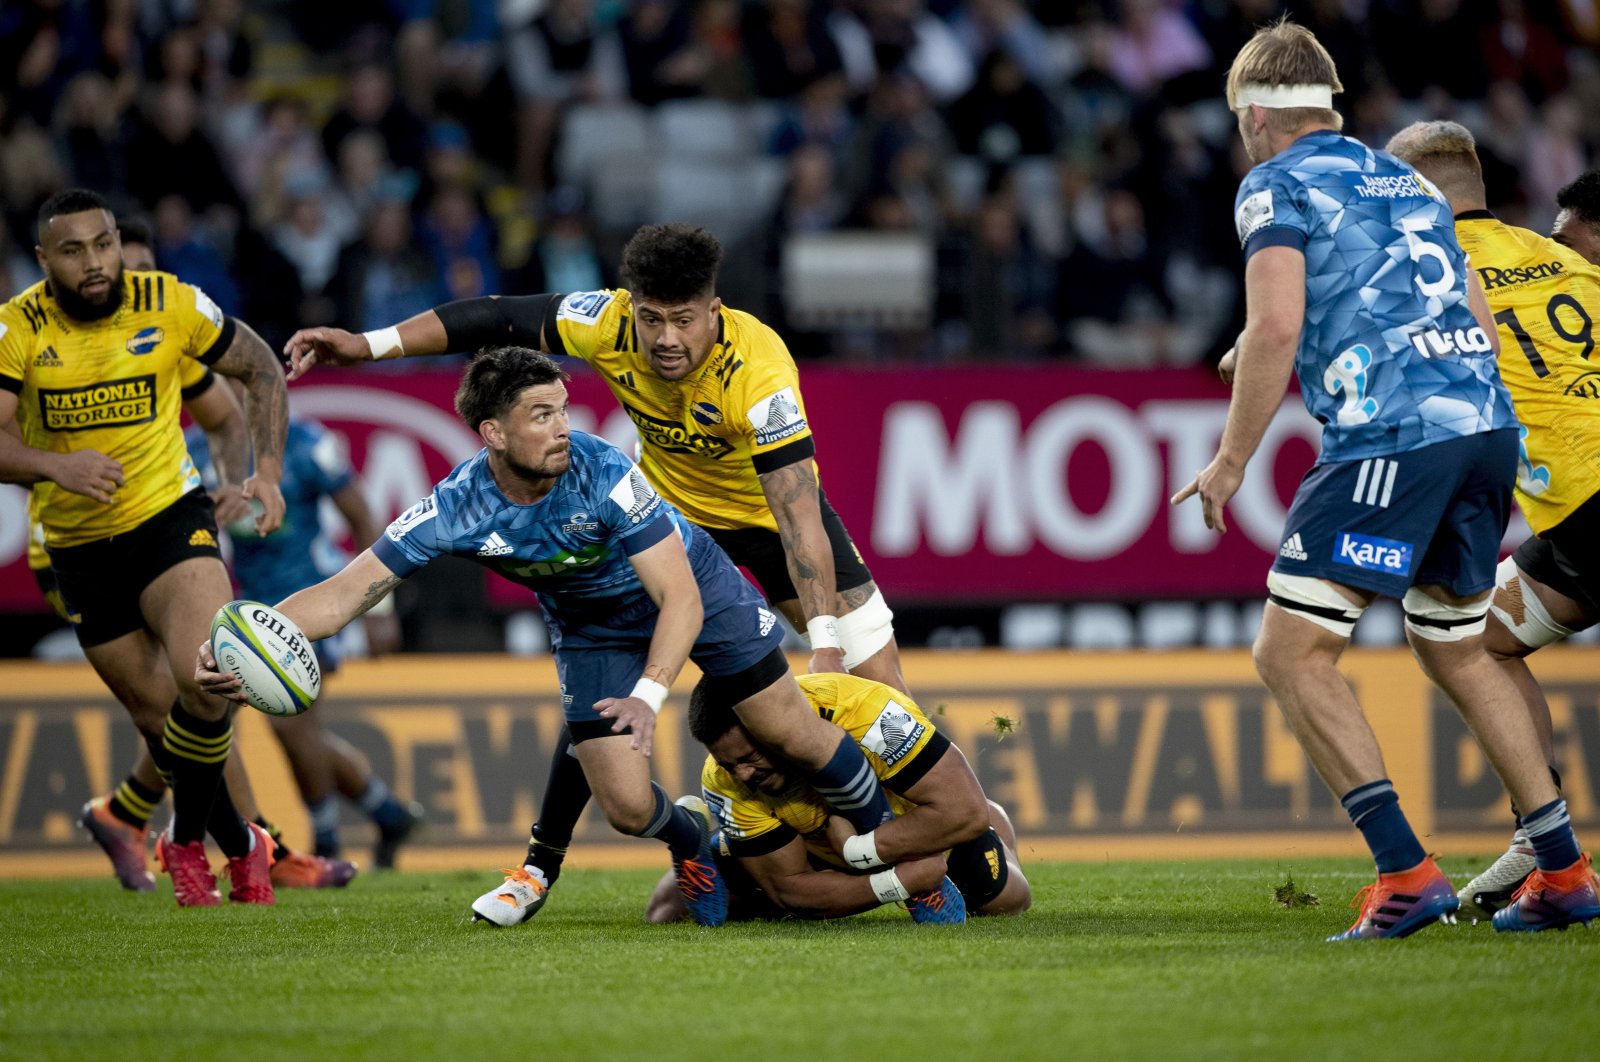 Auckland Blues Blues player Otere Black (C) looks to pass the ball to a teammate during the Super Rugby Aotearoa rugby match between the Blues and the Hurricanes at Eden Park, in Auckland, New Zealand, June 14, 2020. (New Zealand Herald via AP Photo)